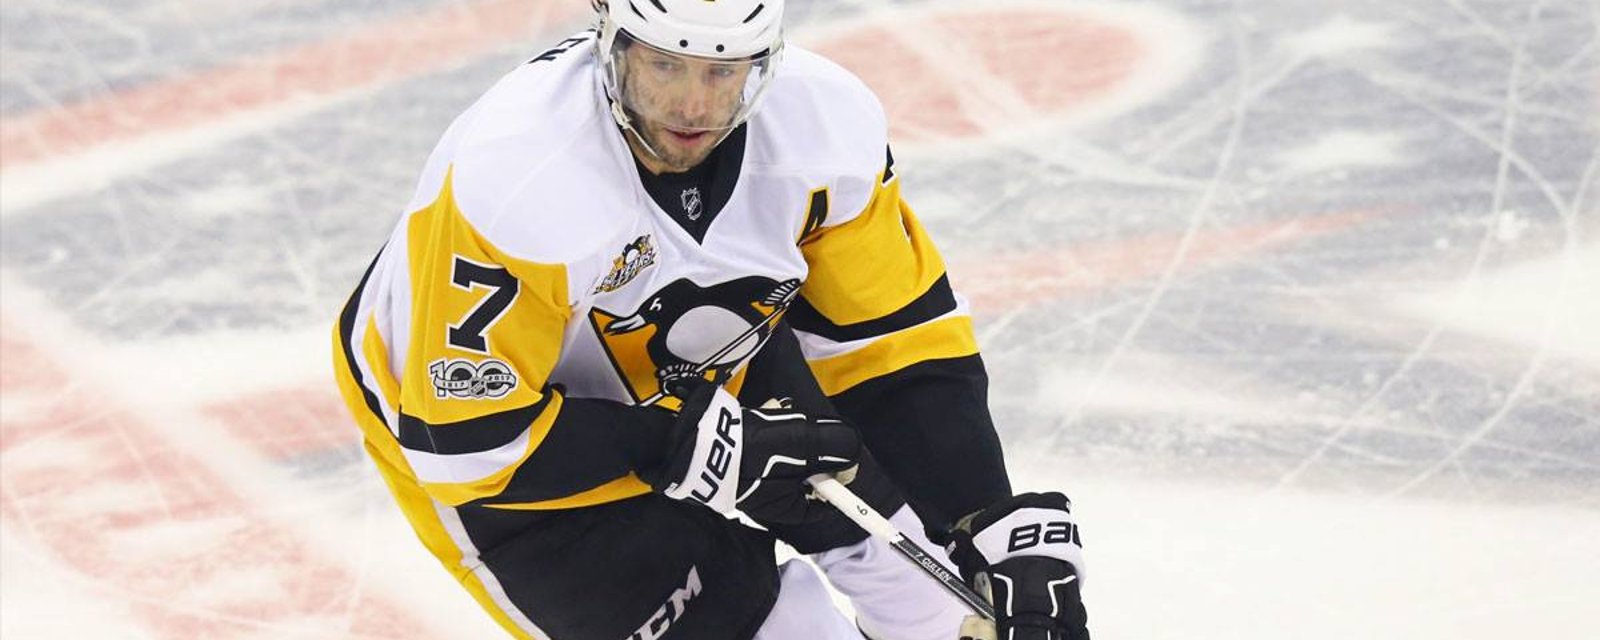 Matt Cullen ditches retirement and signs one-year contract! 